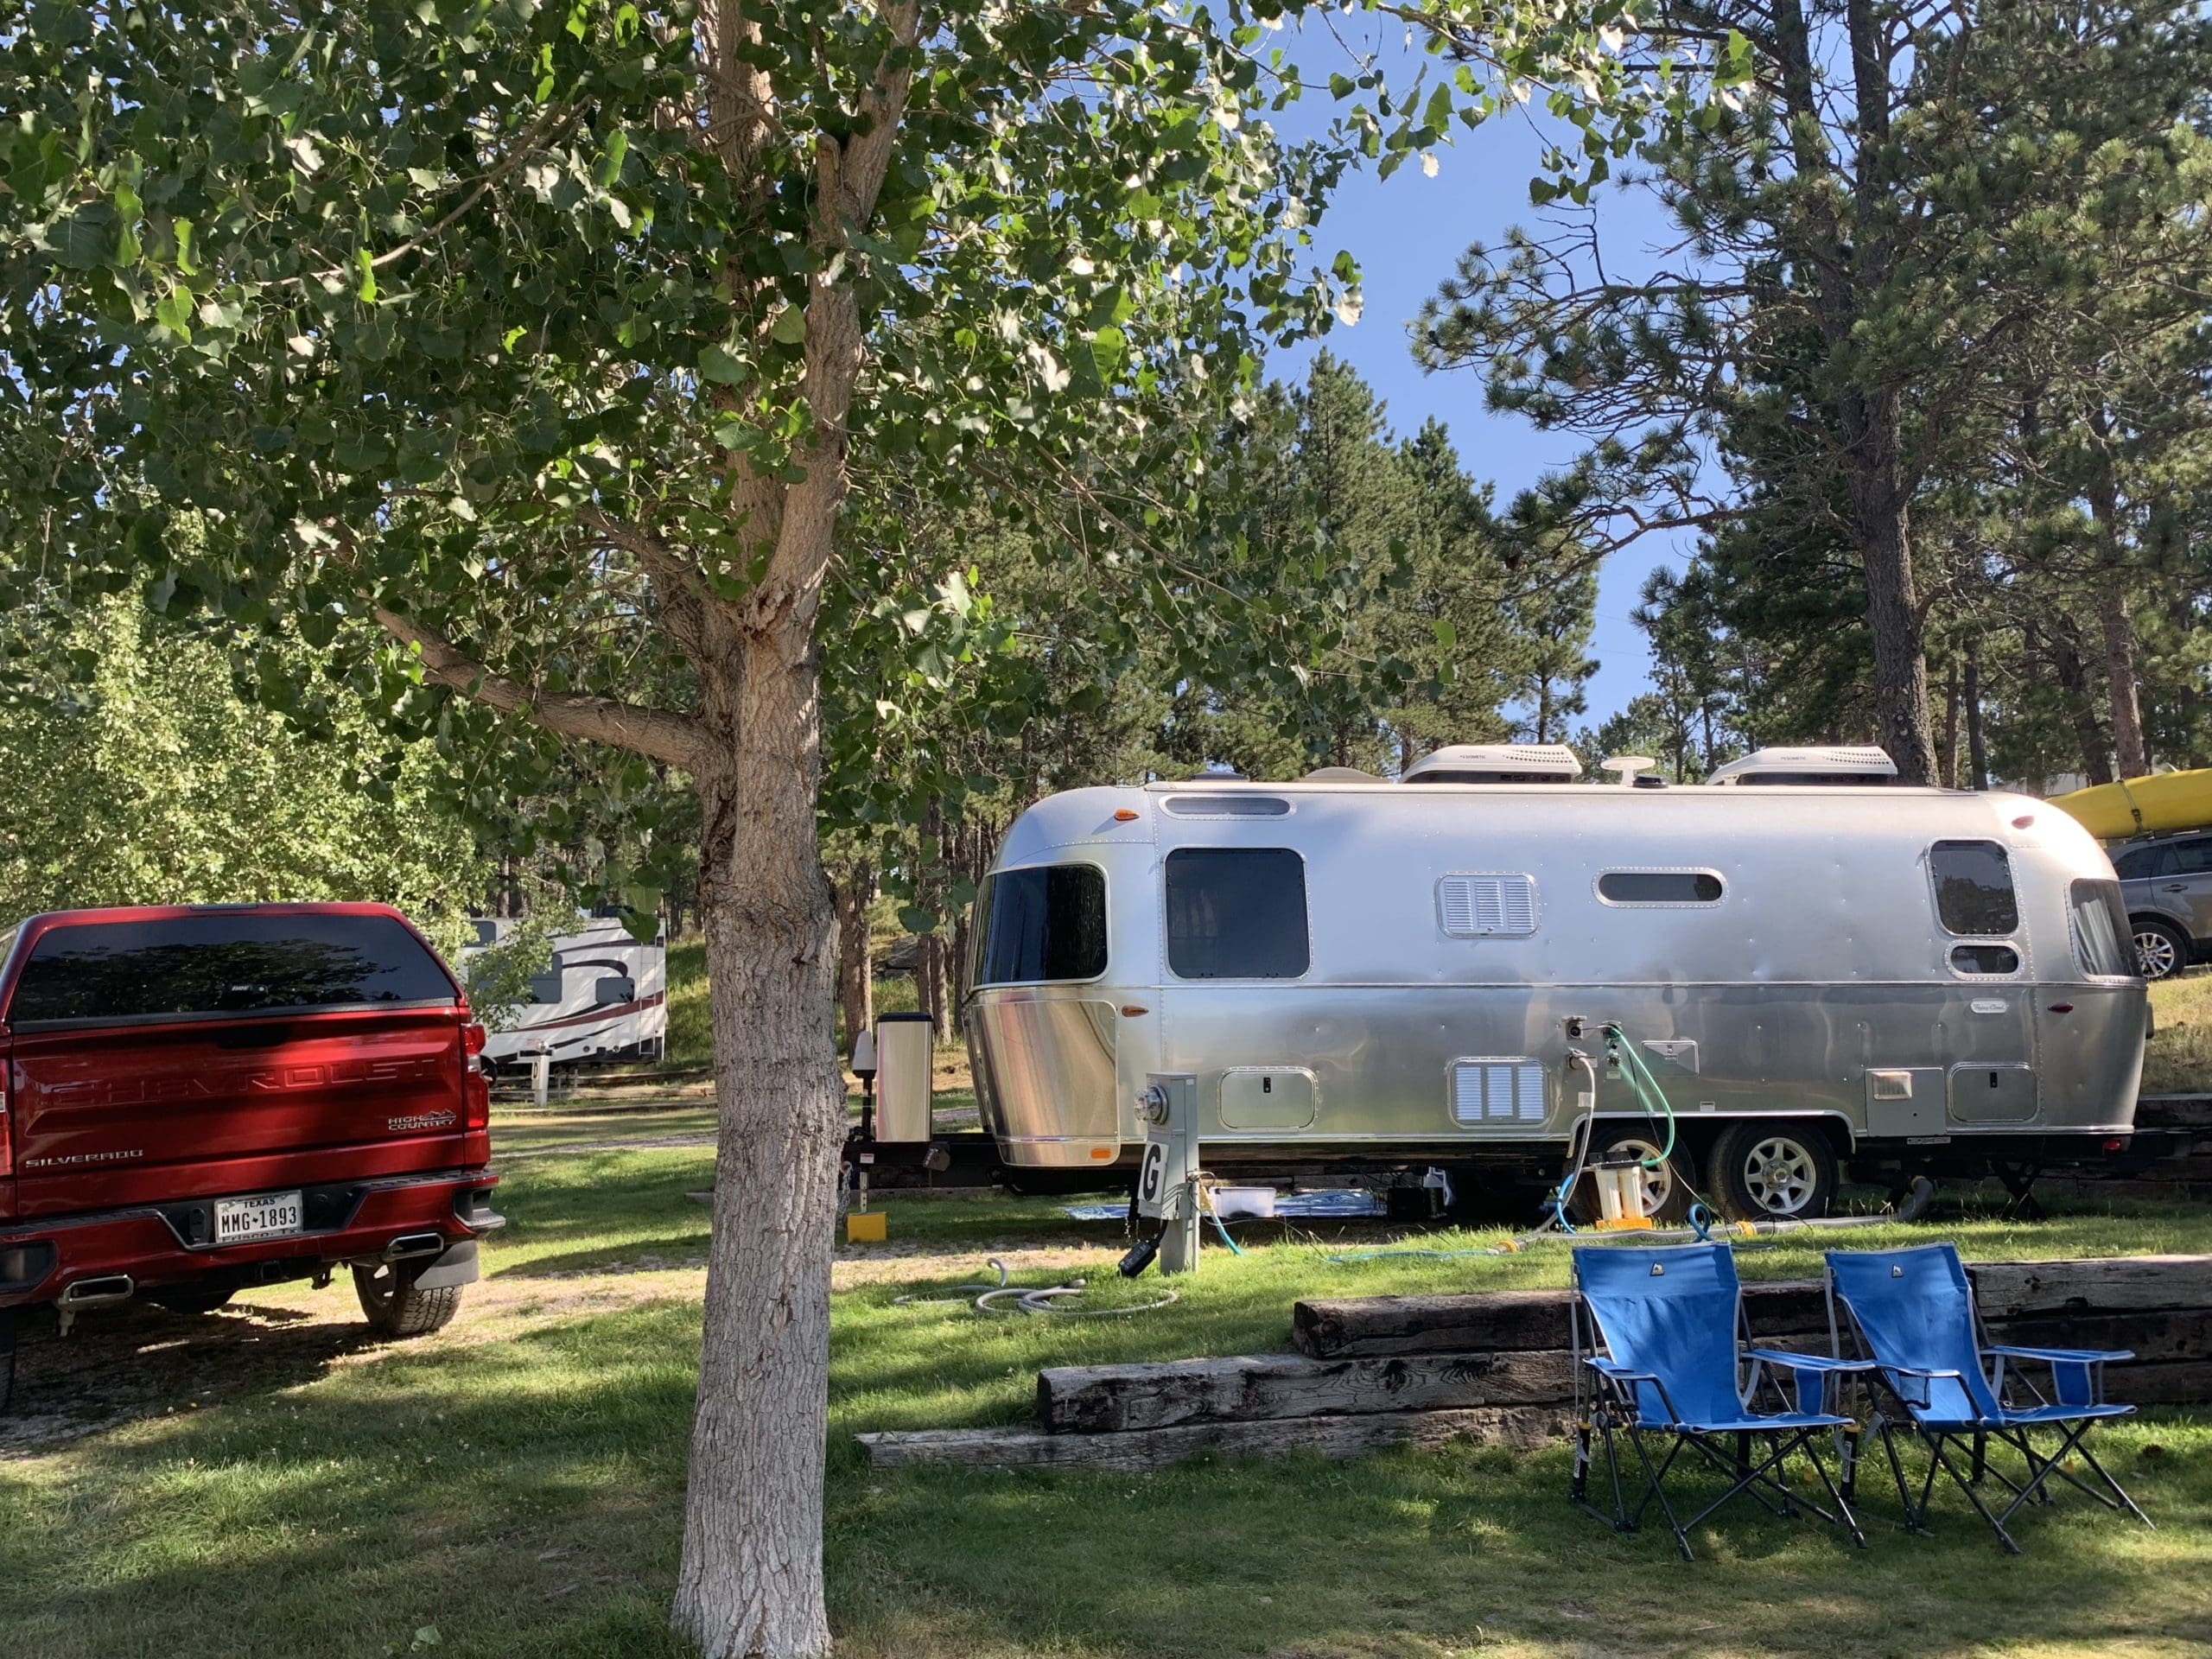 smooth silver airstream camper trailer parked at a RV spot at Beaver Lake Campground with a red truck